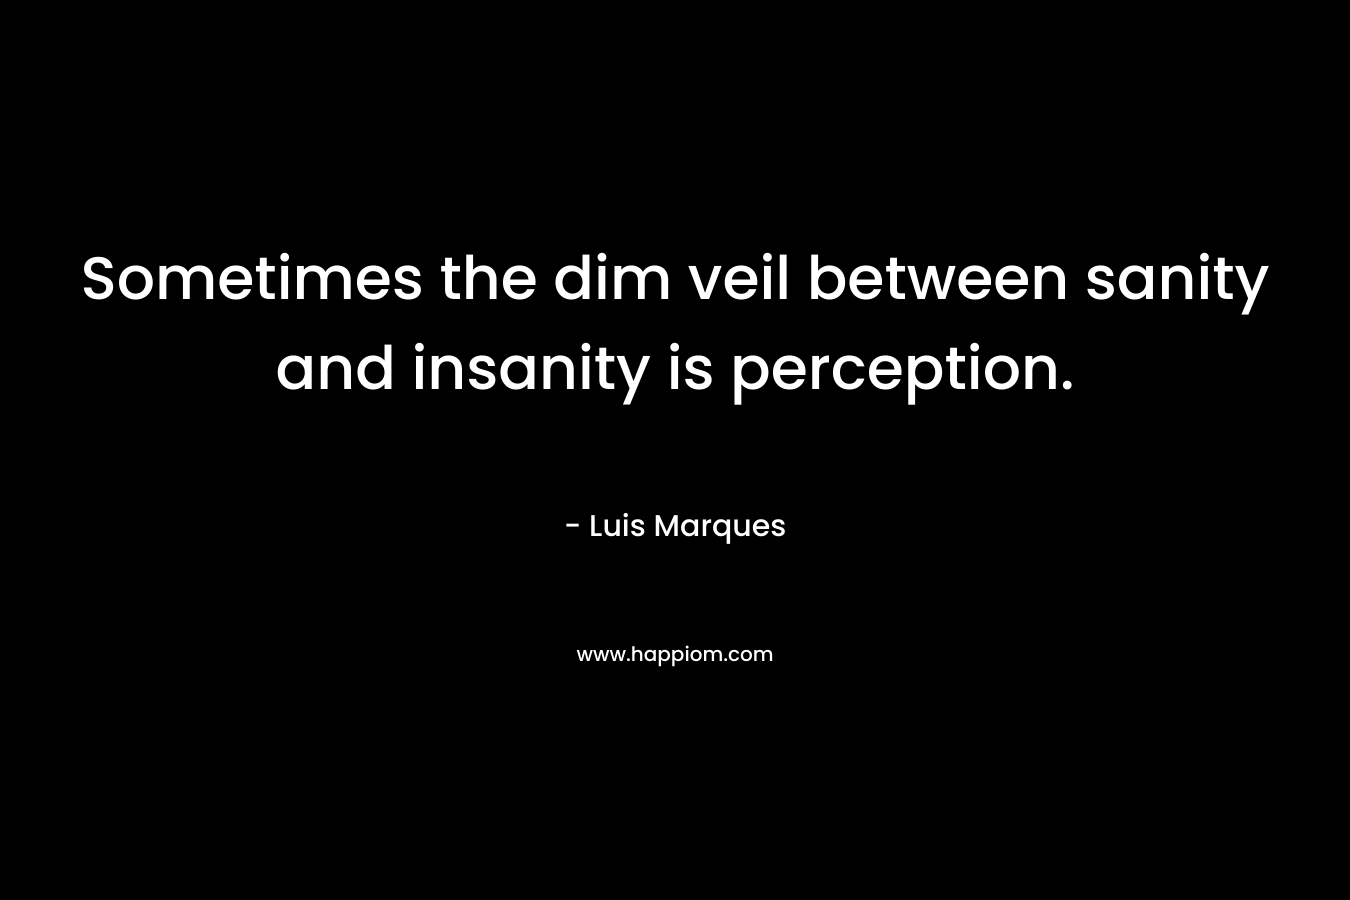 Sometimes the dim veil between sanity and insanity is perception.